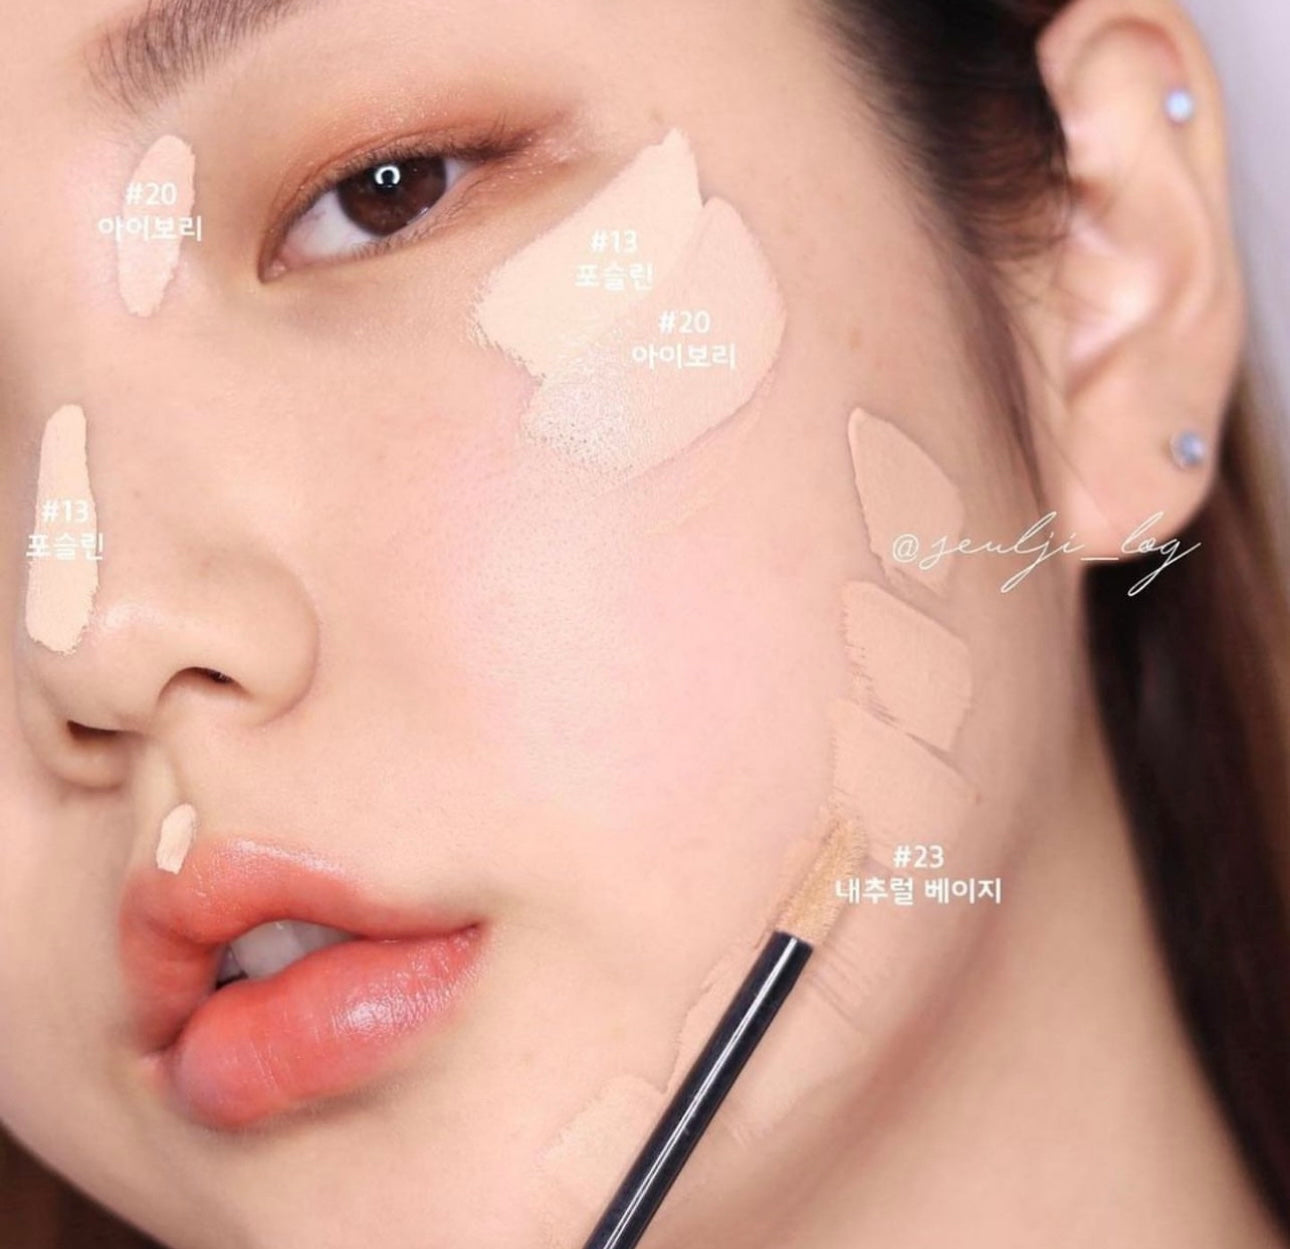 WakeMake Defining Cover Concealer 持久極致隱蔽遮瑕液💫限量套裝附送遮瑕筆🌟